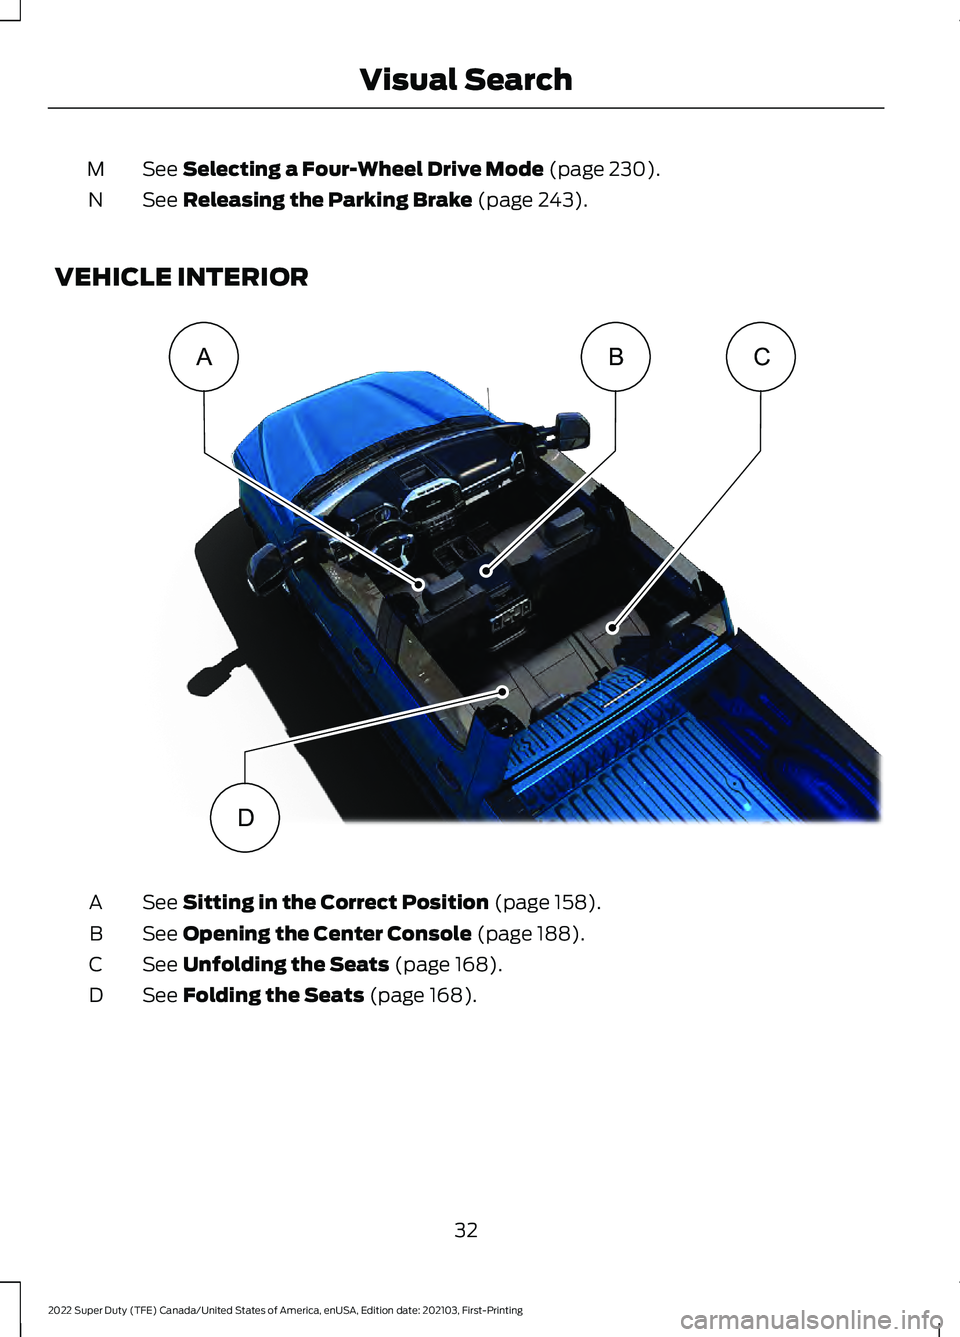 FORD F-550 2022  Owners Manual See Selecting a Four-Wheel Drive Mode (page 230).
M
See 
Releasing the Parking Brake (page 243).
N
VEHICLE INTERIOR See 
Sitting in the Correct Position (page 158).
A
See 
Opening the Center Console (